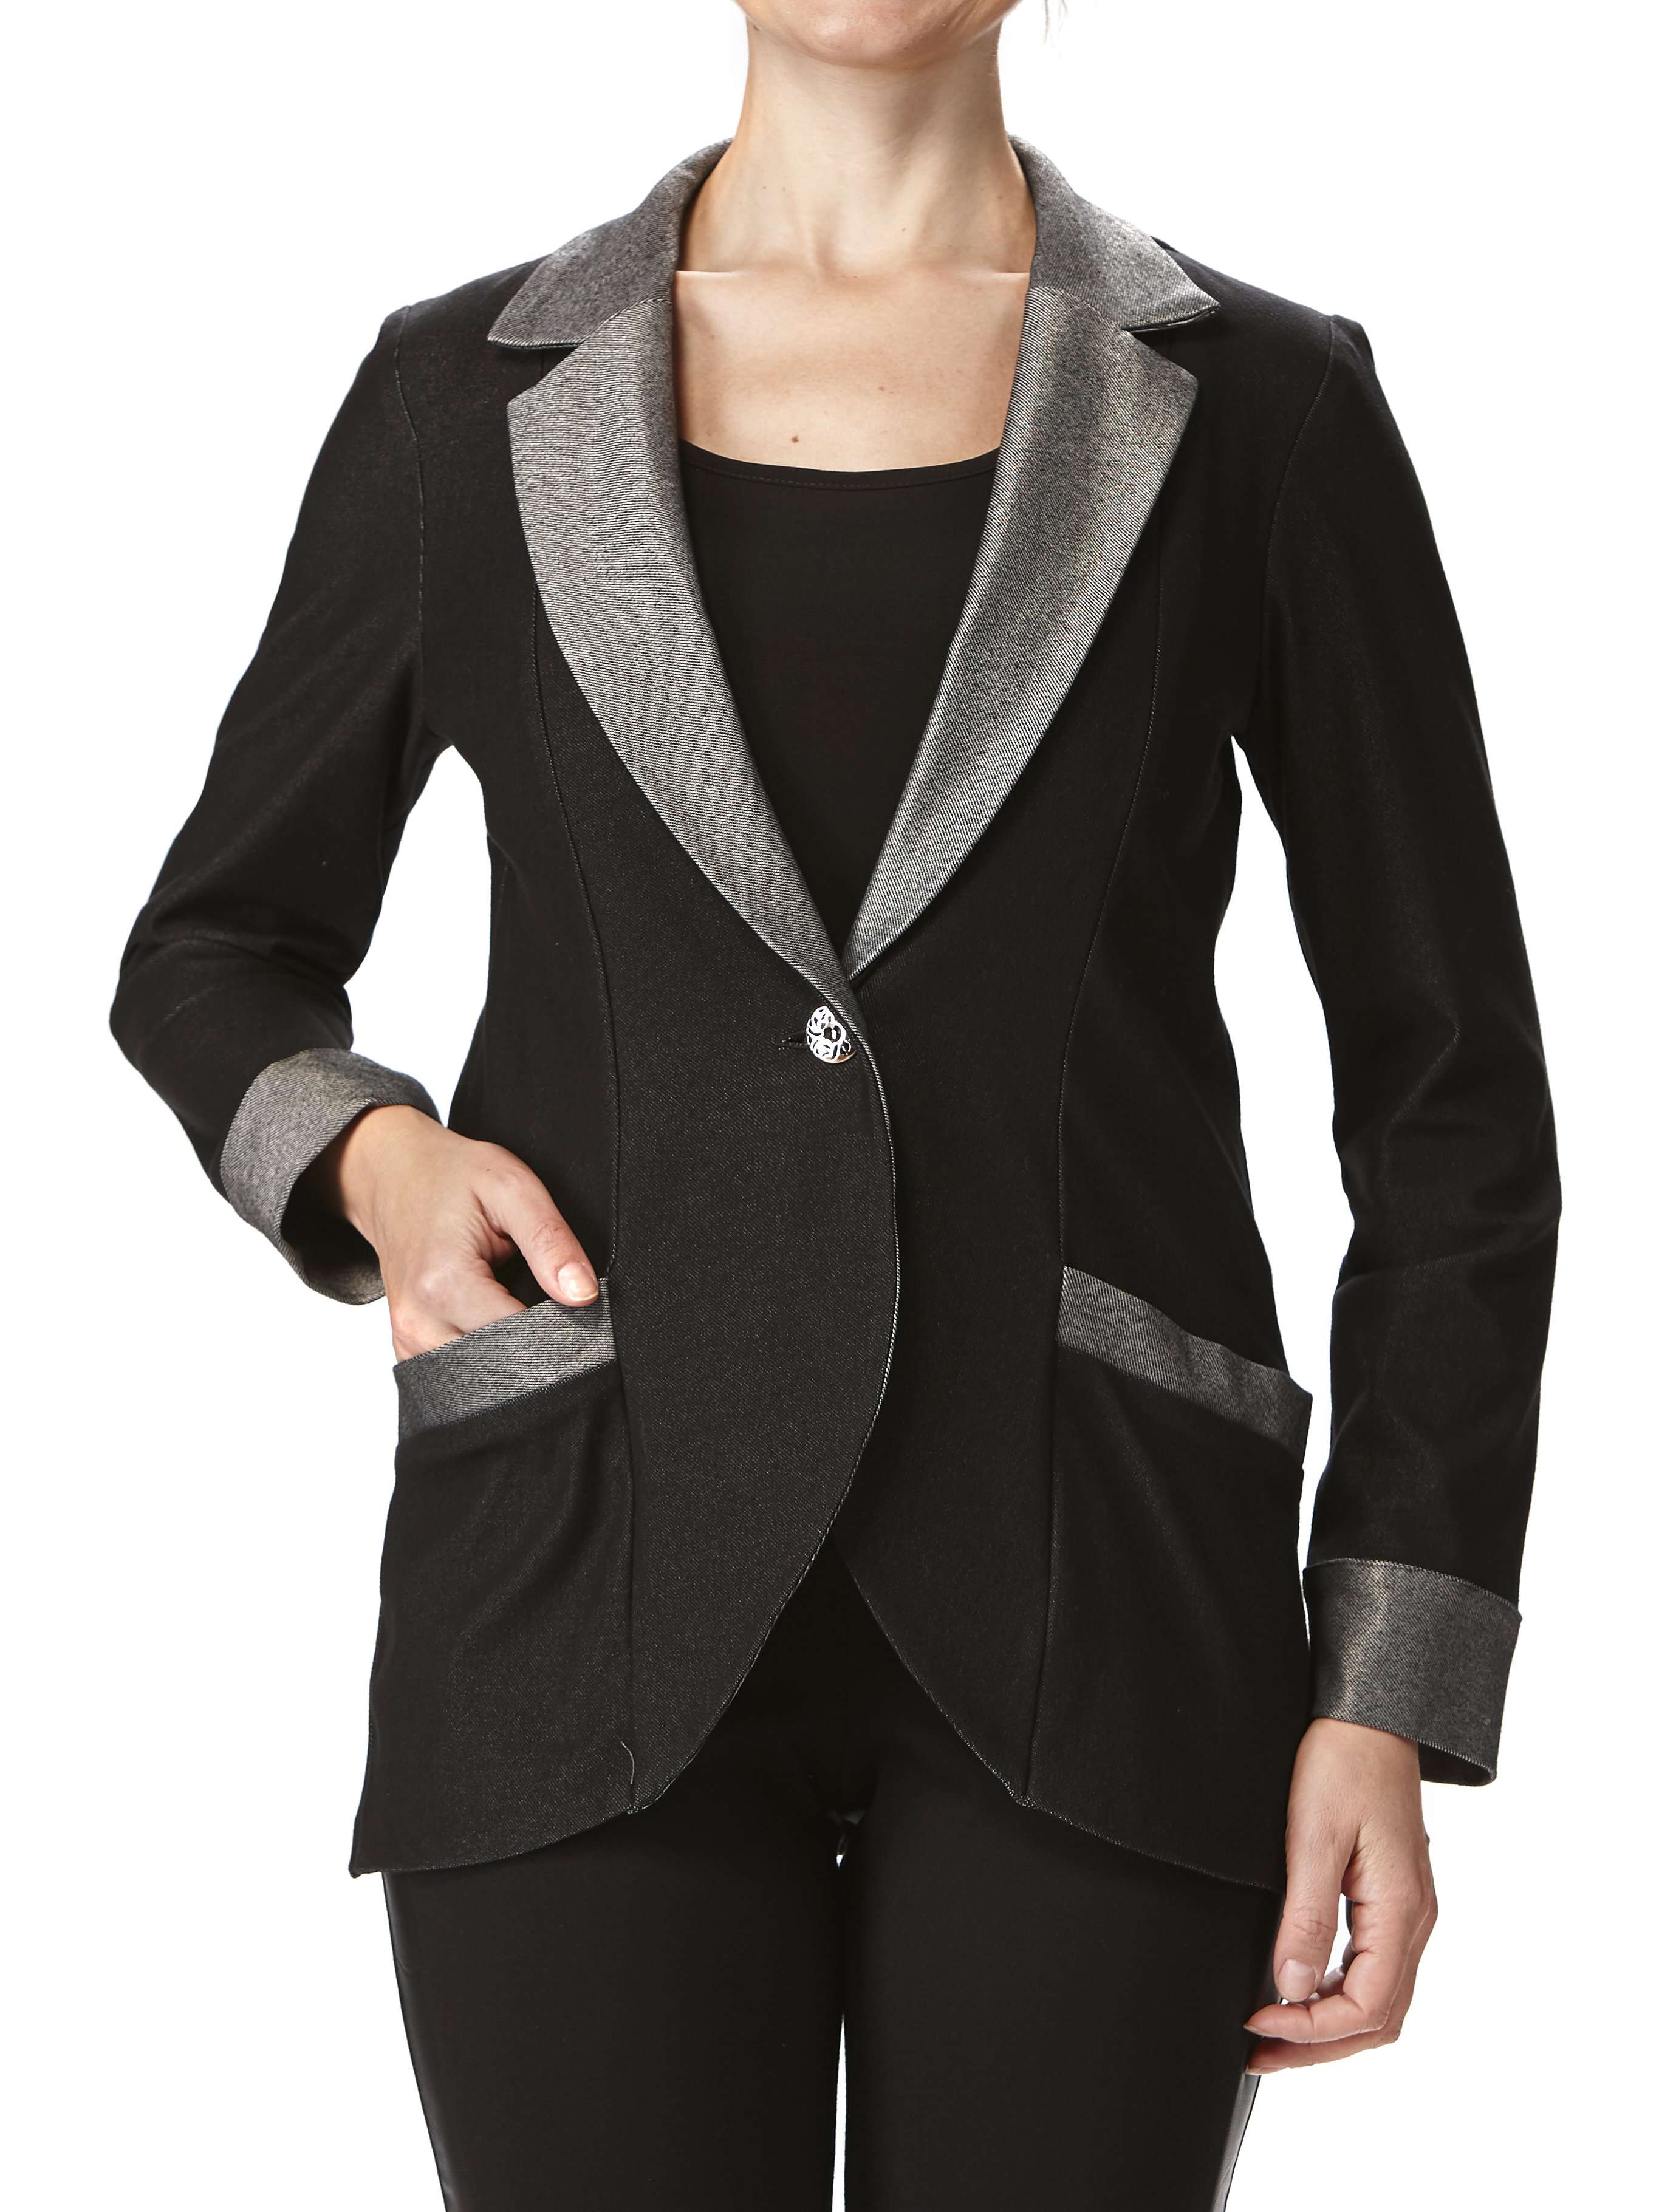 Women's Jacket Black Stretch Denim Features Full Pockets Quality Fabric Proudly Made in Canada - Yvonne Marie - Yvonne Marie